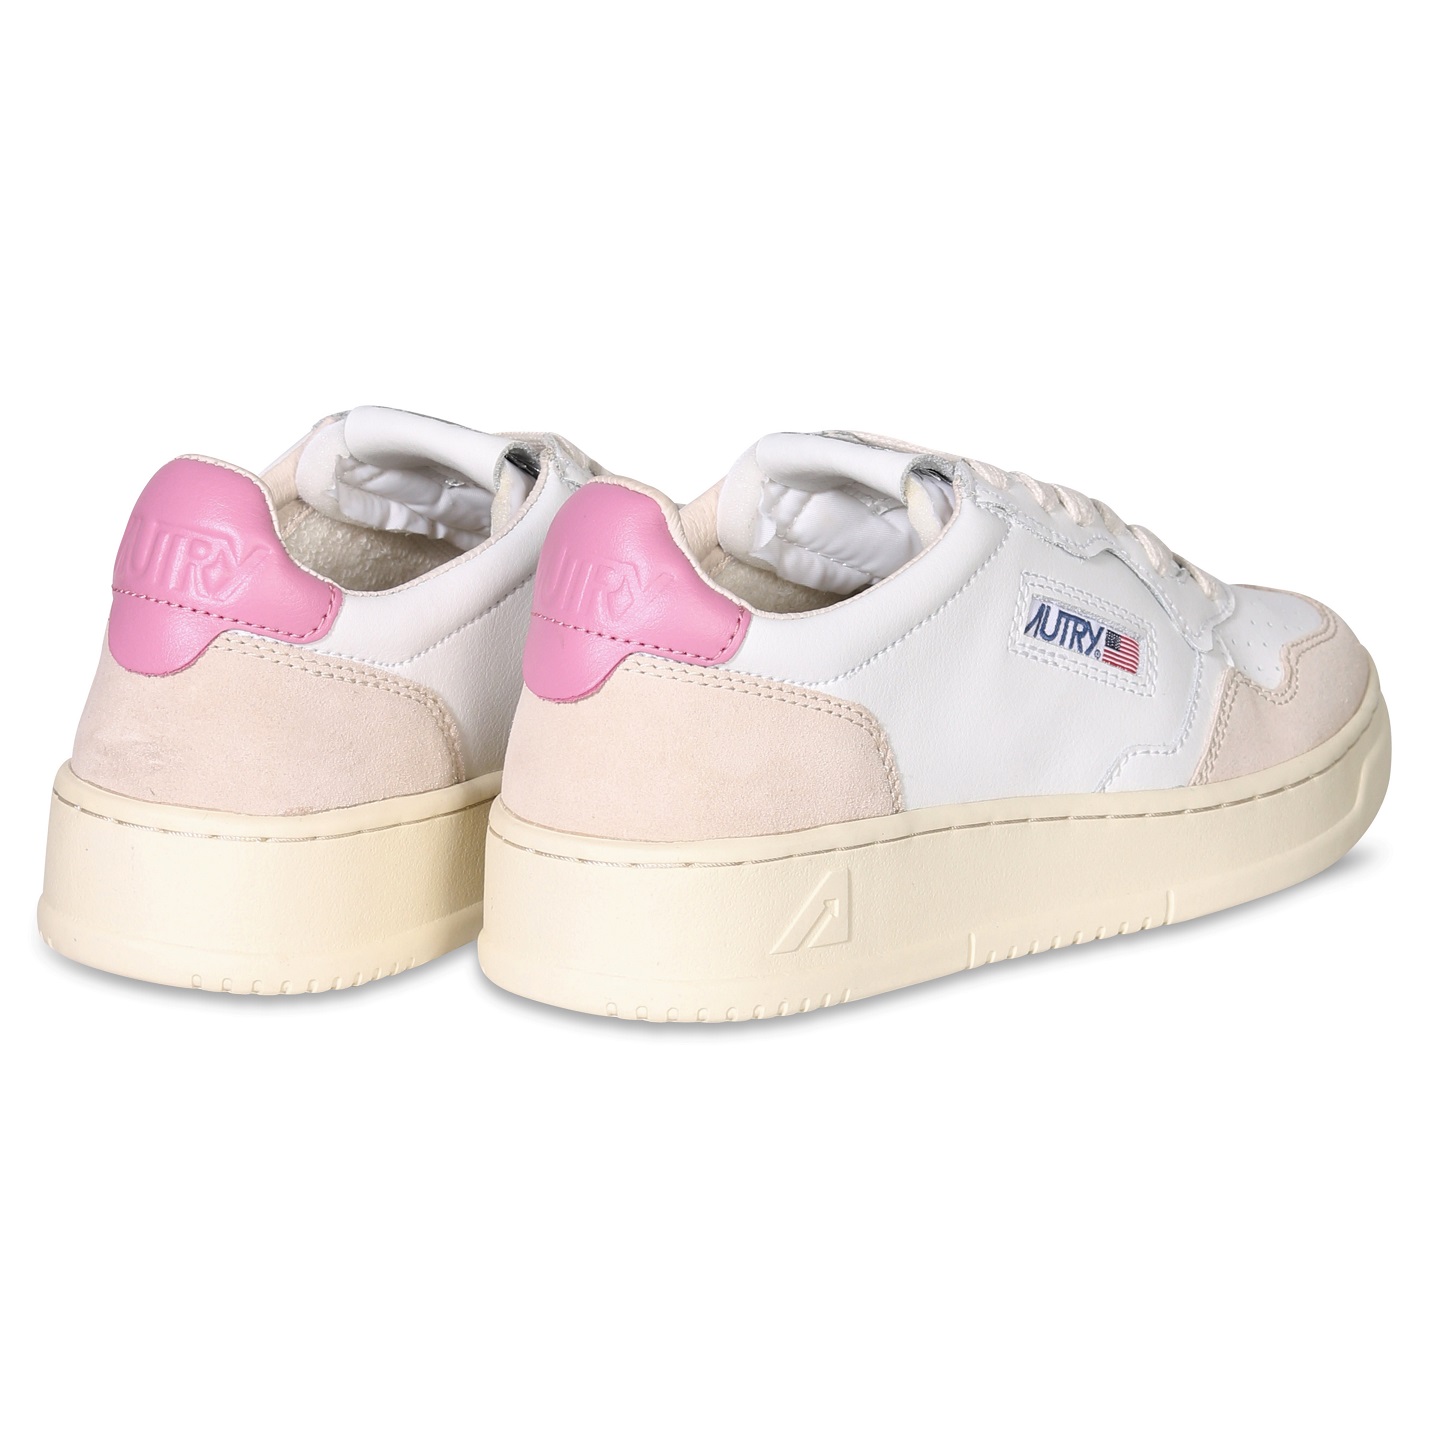 AUTRY ACTION SHOES Low Sneaker in Beige Suede/White/Pink 35